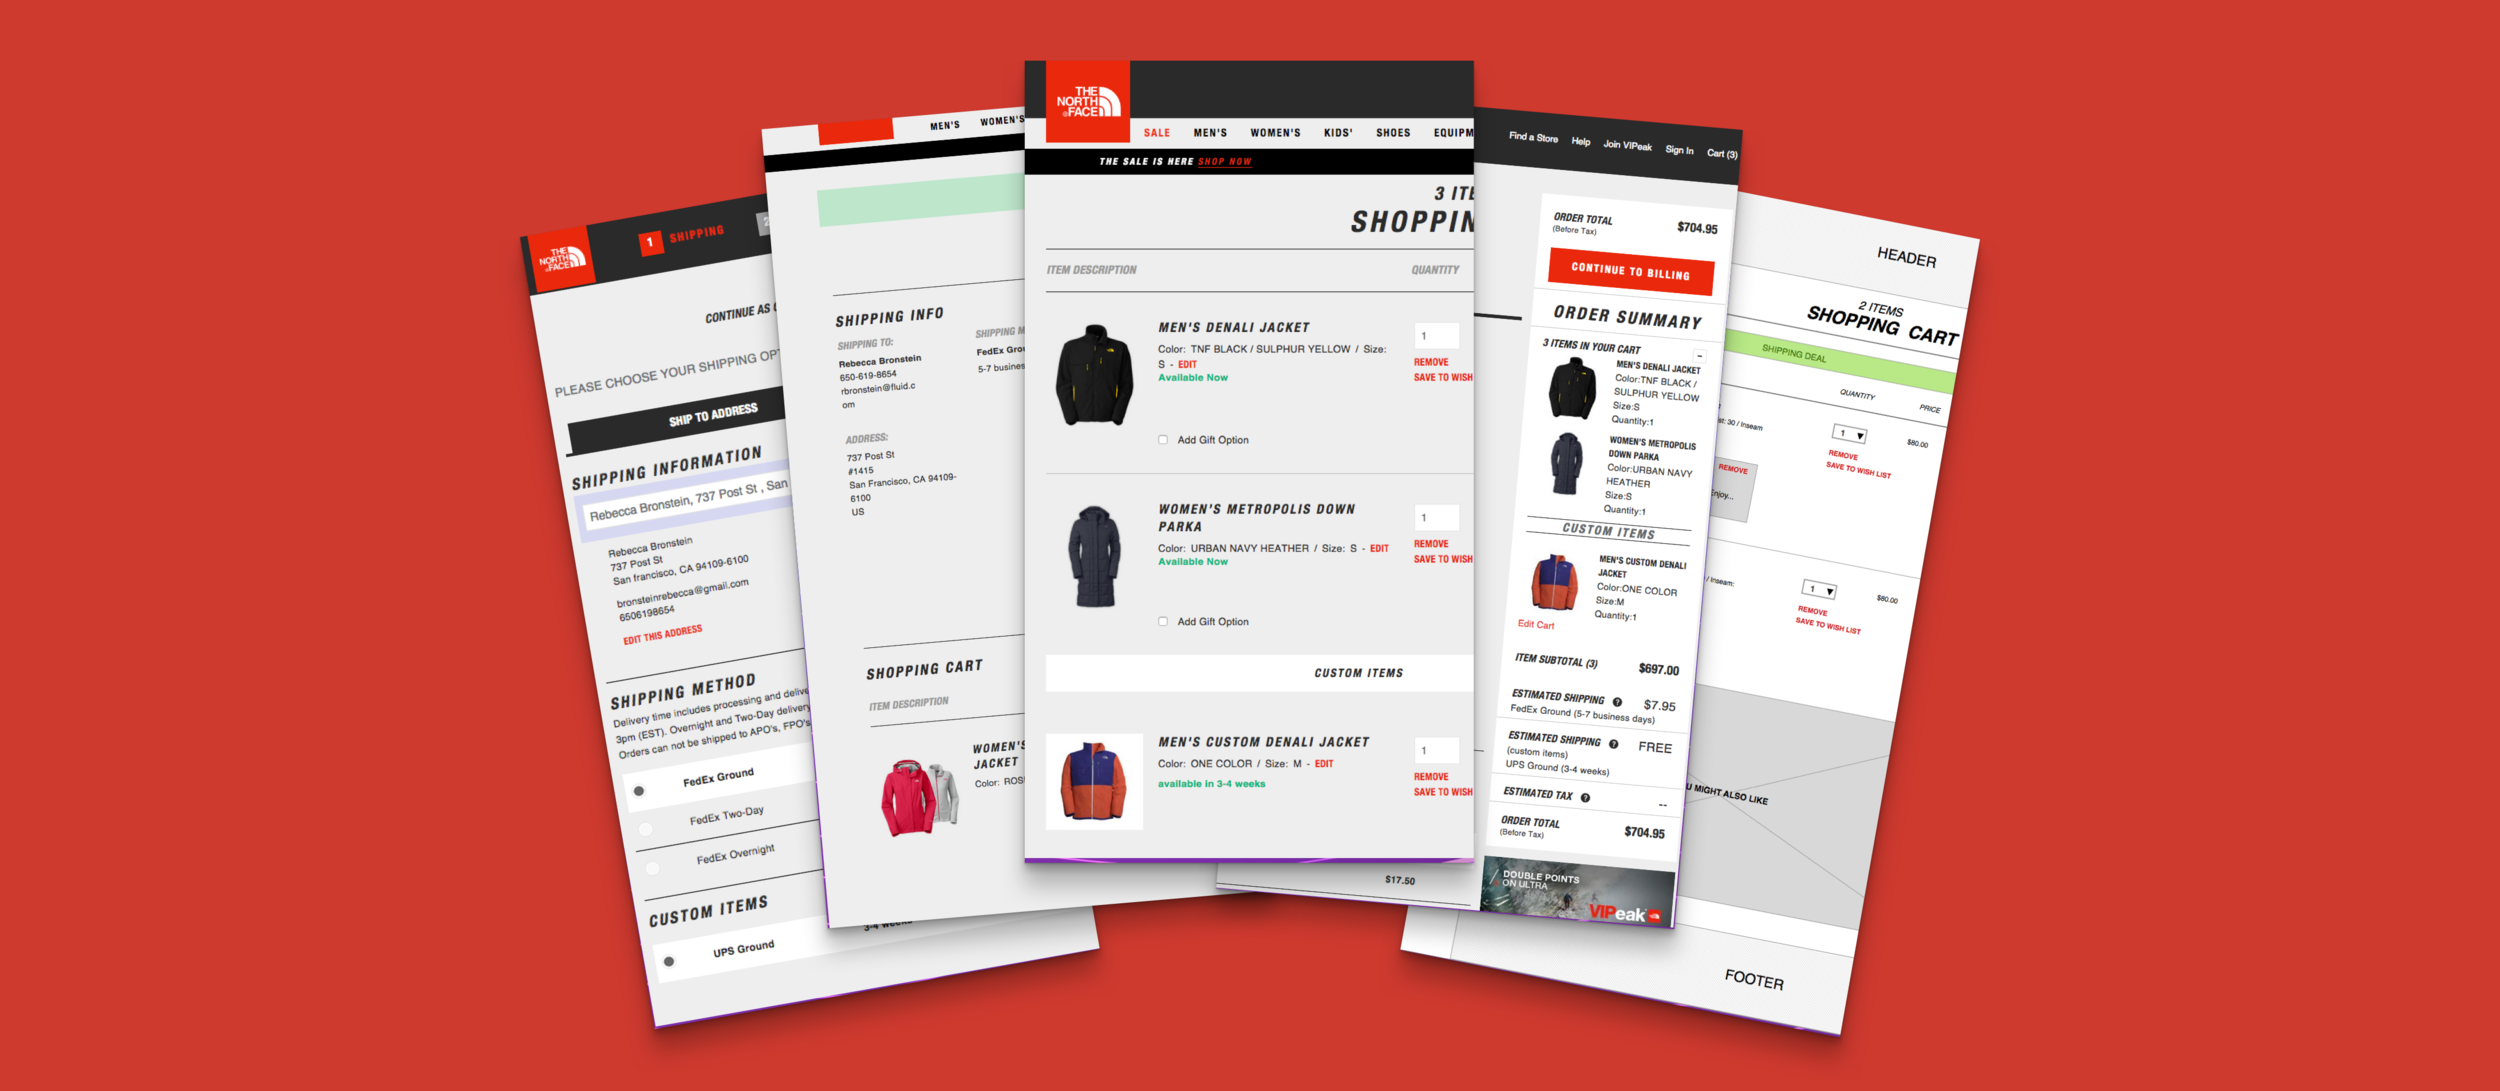 north face website not working